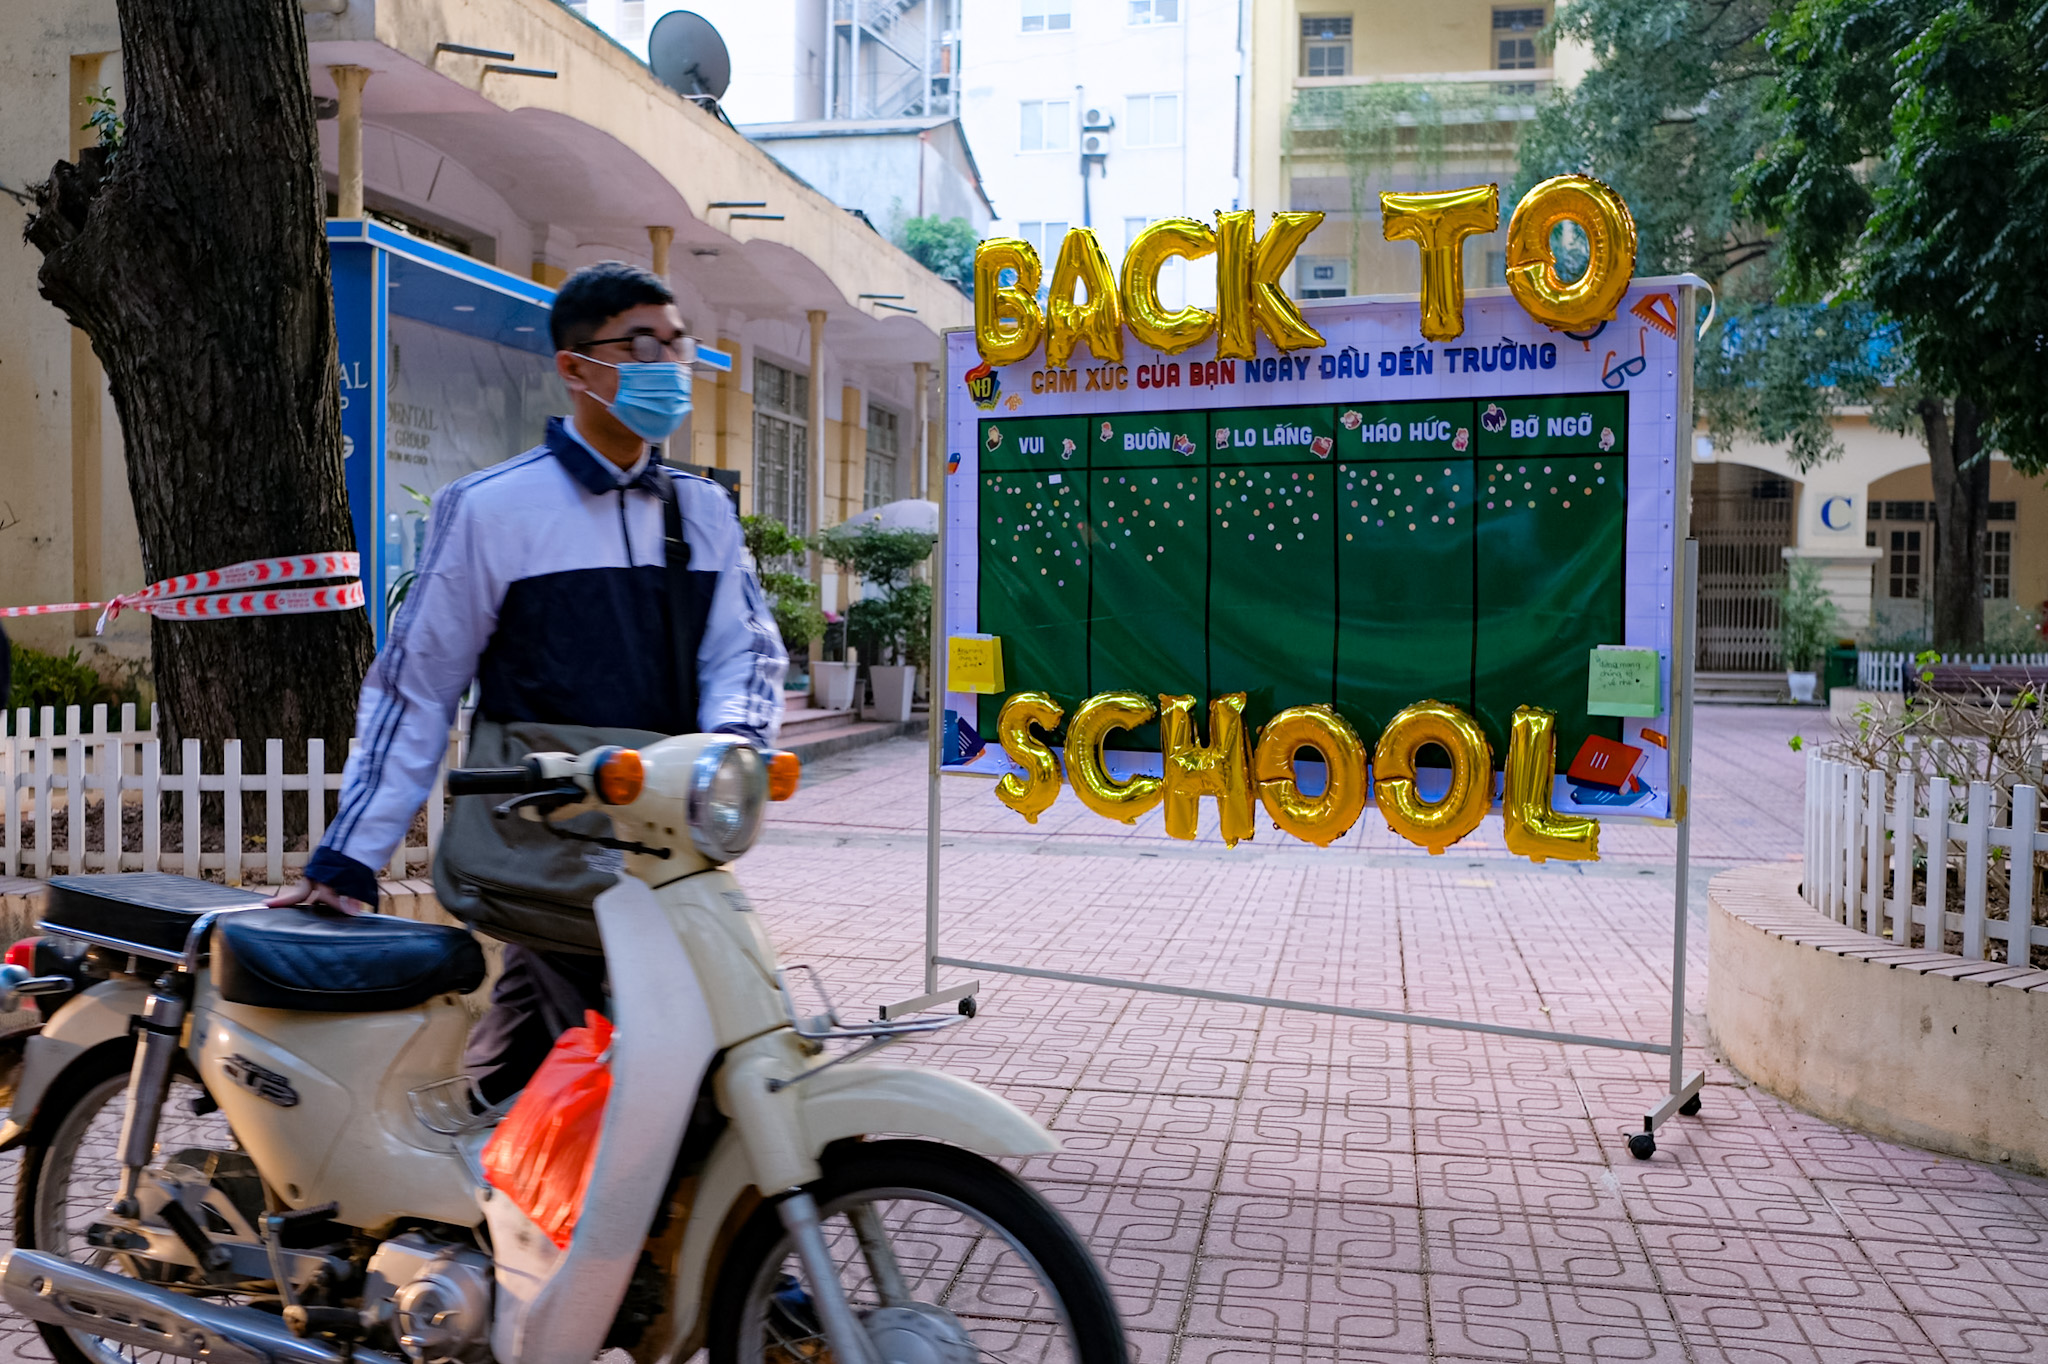 A board is put up for students to share their feelings on their return to Viet Duc High School in Hoan Kiem District, Hanoi, December 6, 2021. Photo: Tuoi Tre